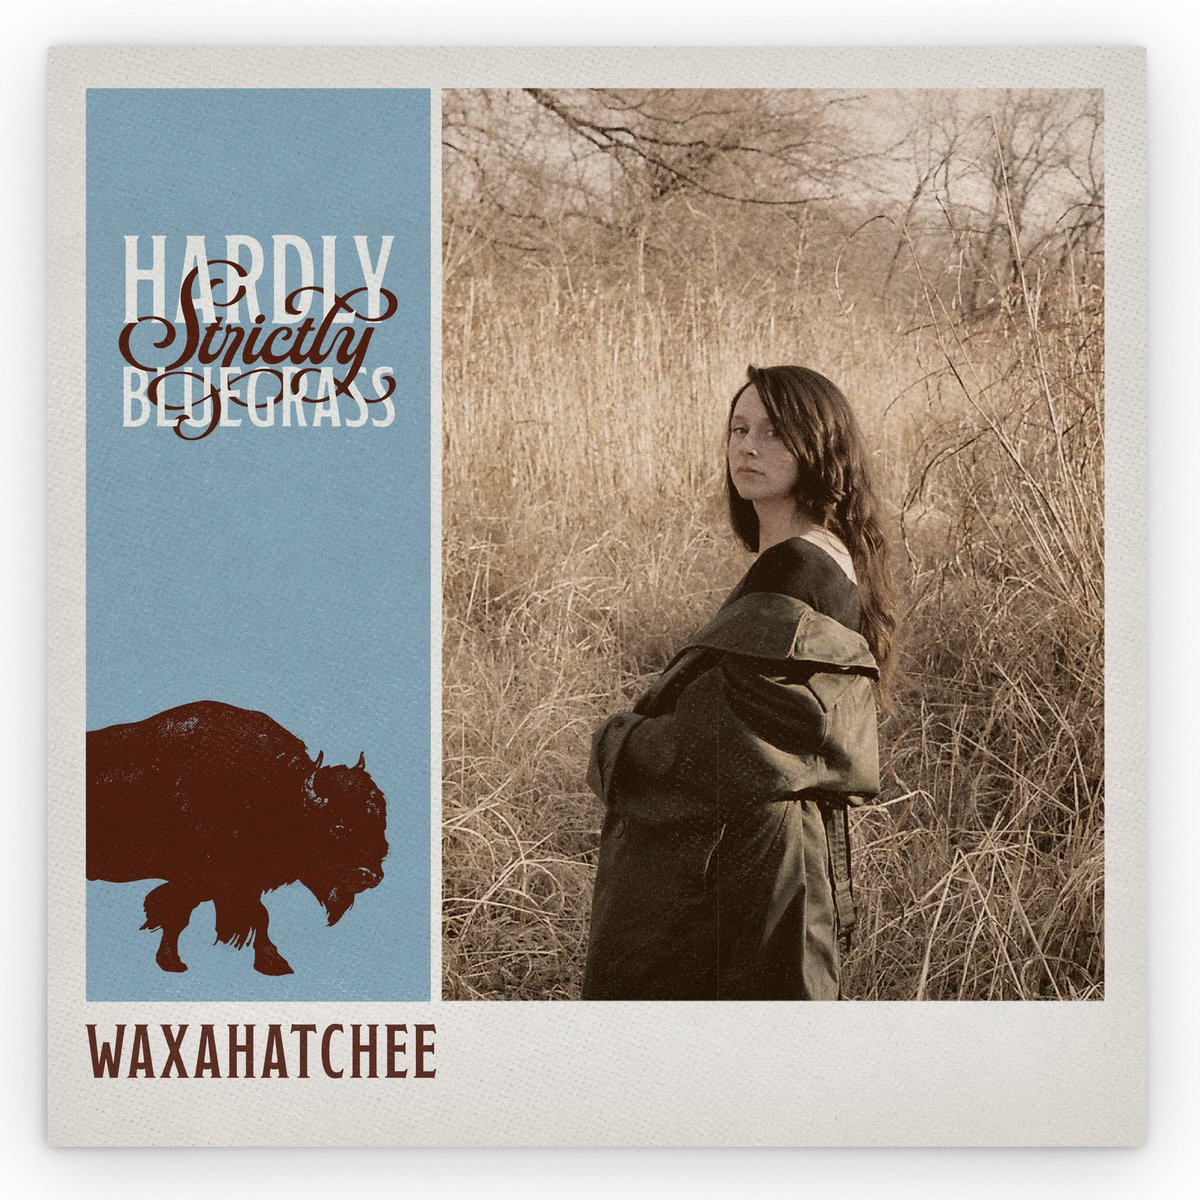 Waxahatchee will be performing at @HSBFest this year! More info here: hardlystrictlybluegrass.com